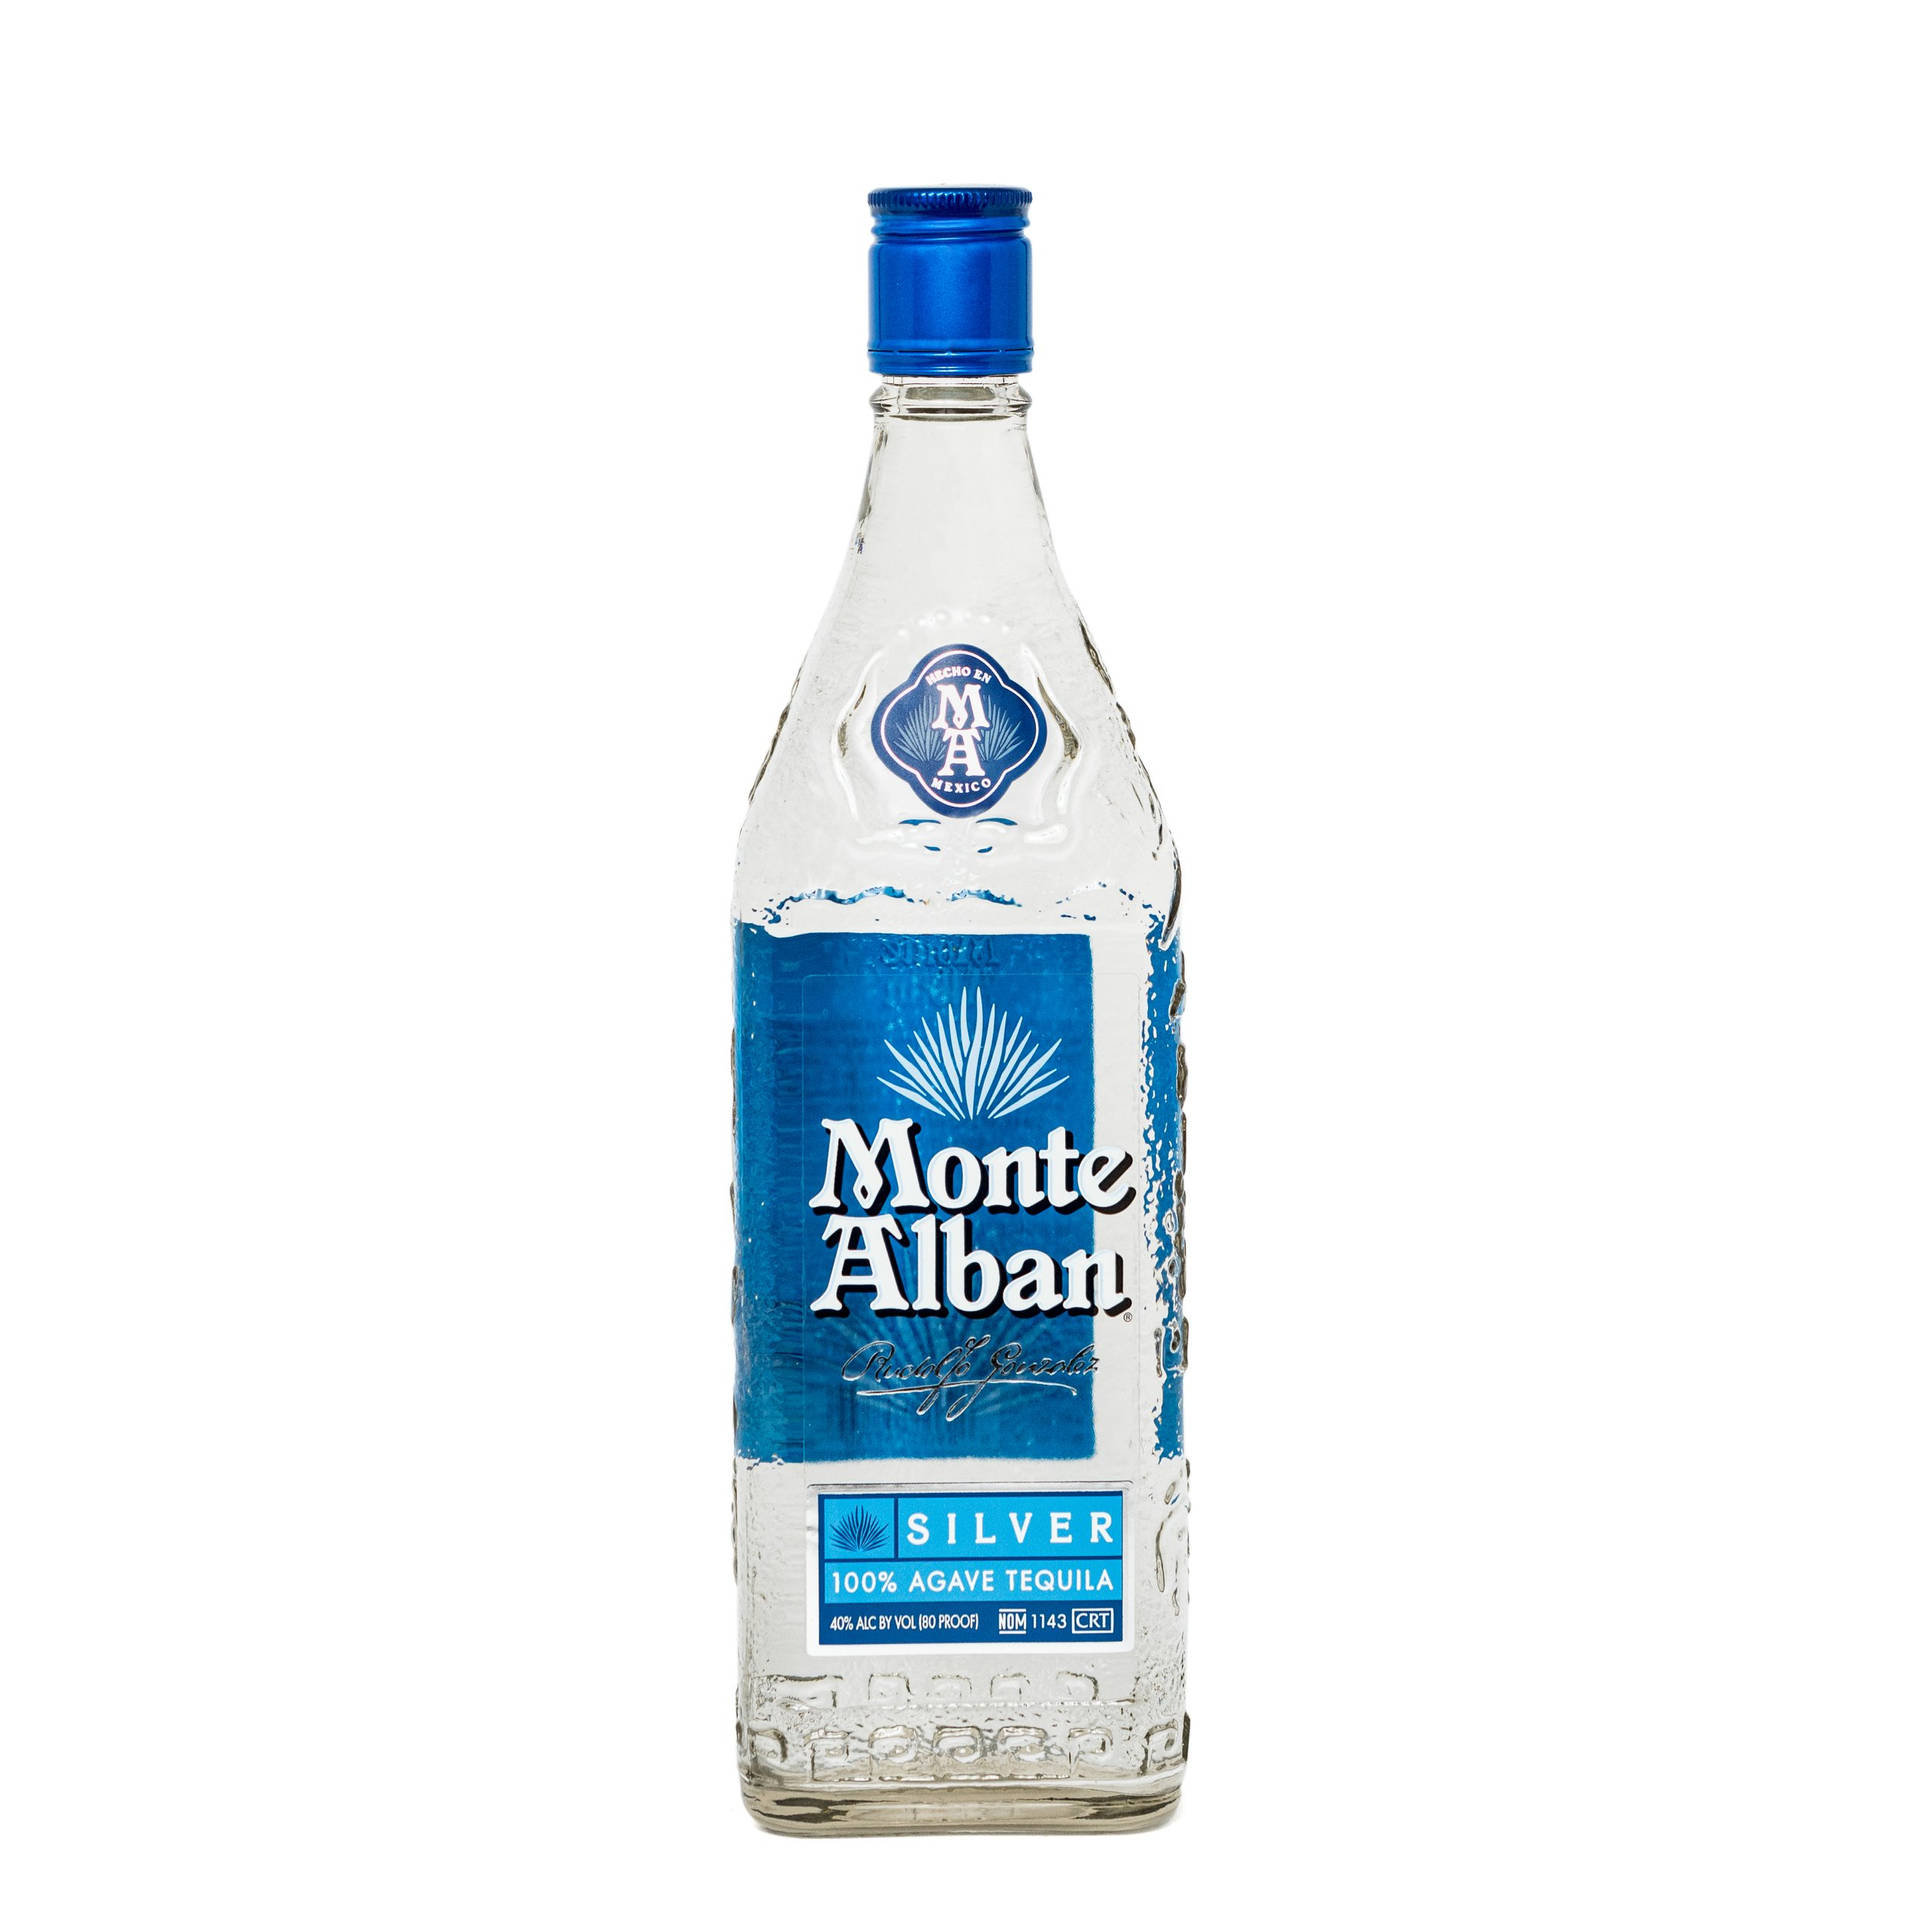 Exquisite Monte Alban Silver Tequila with Blue Tin Cap against a White Background. Wallpaper